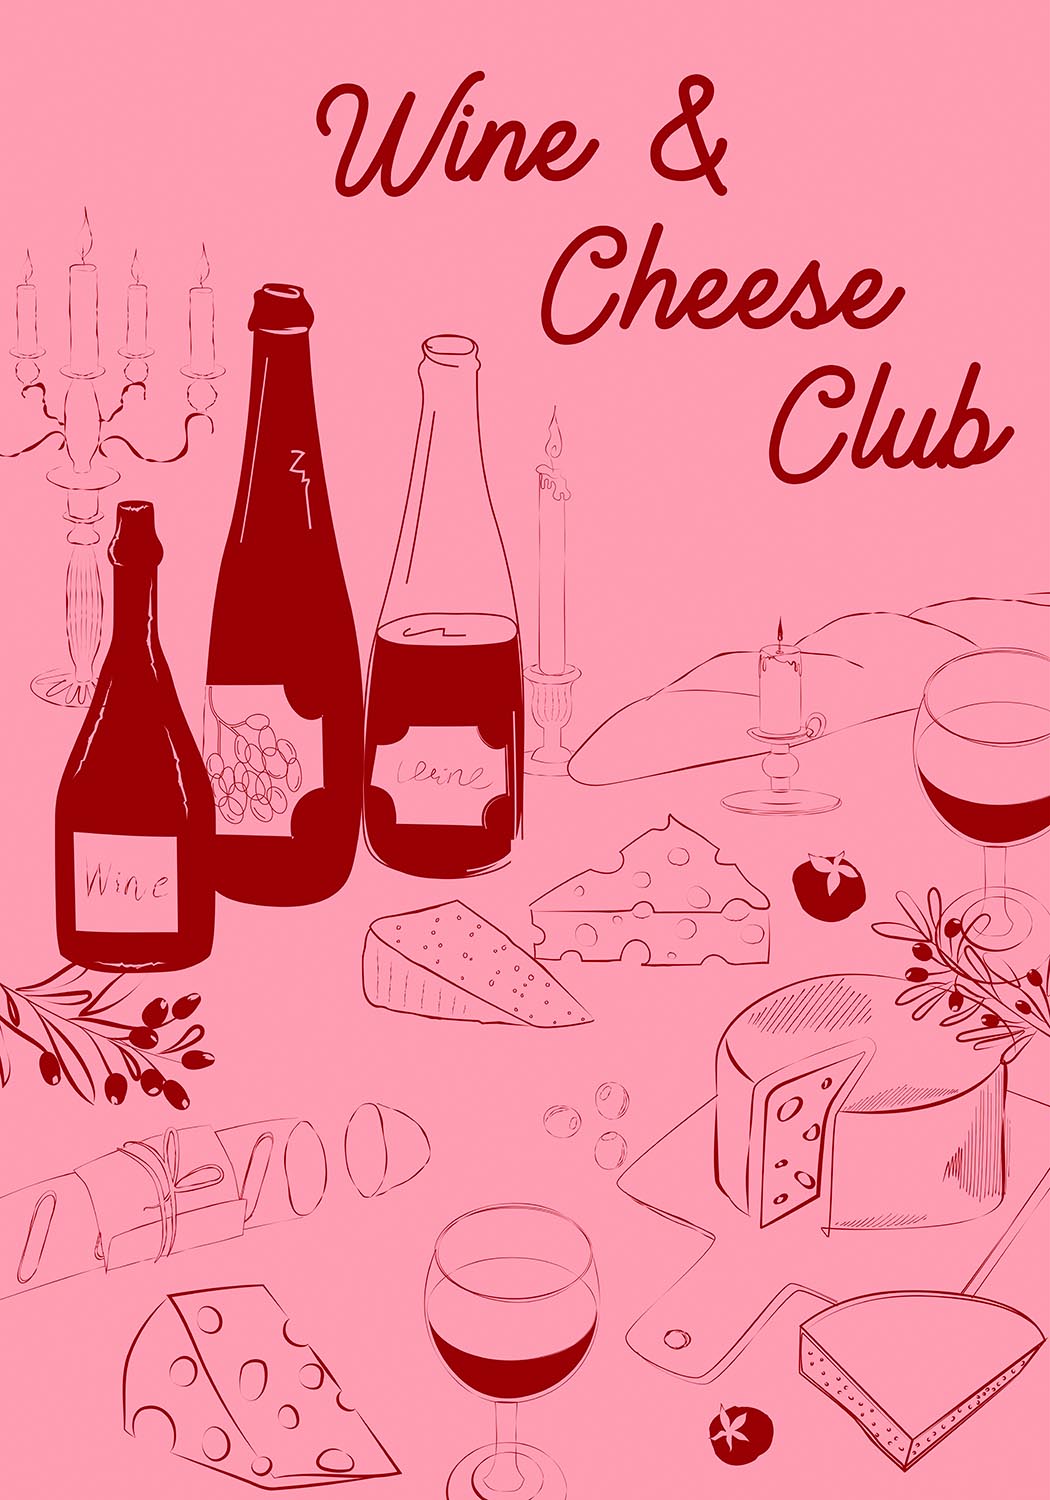 Chic poster with a pink background showcasing line art illustrations of wine bottles, a candelabra, various cheeses, and a wine glass, with the text 'Wine & Cheese Club' in elegant script.